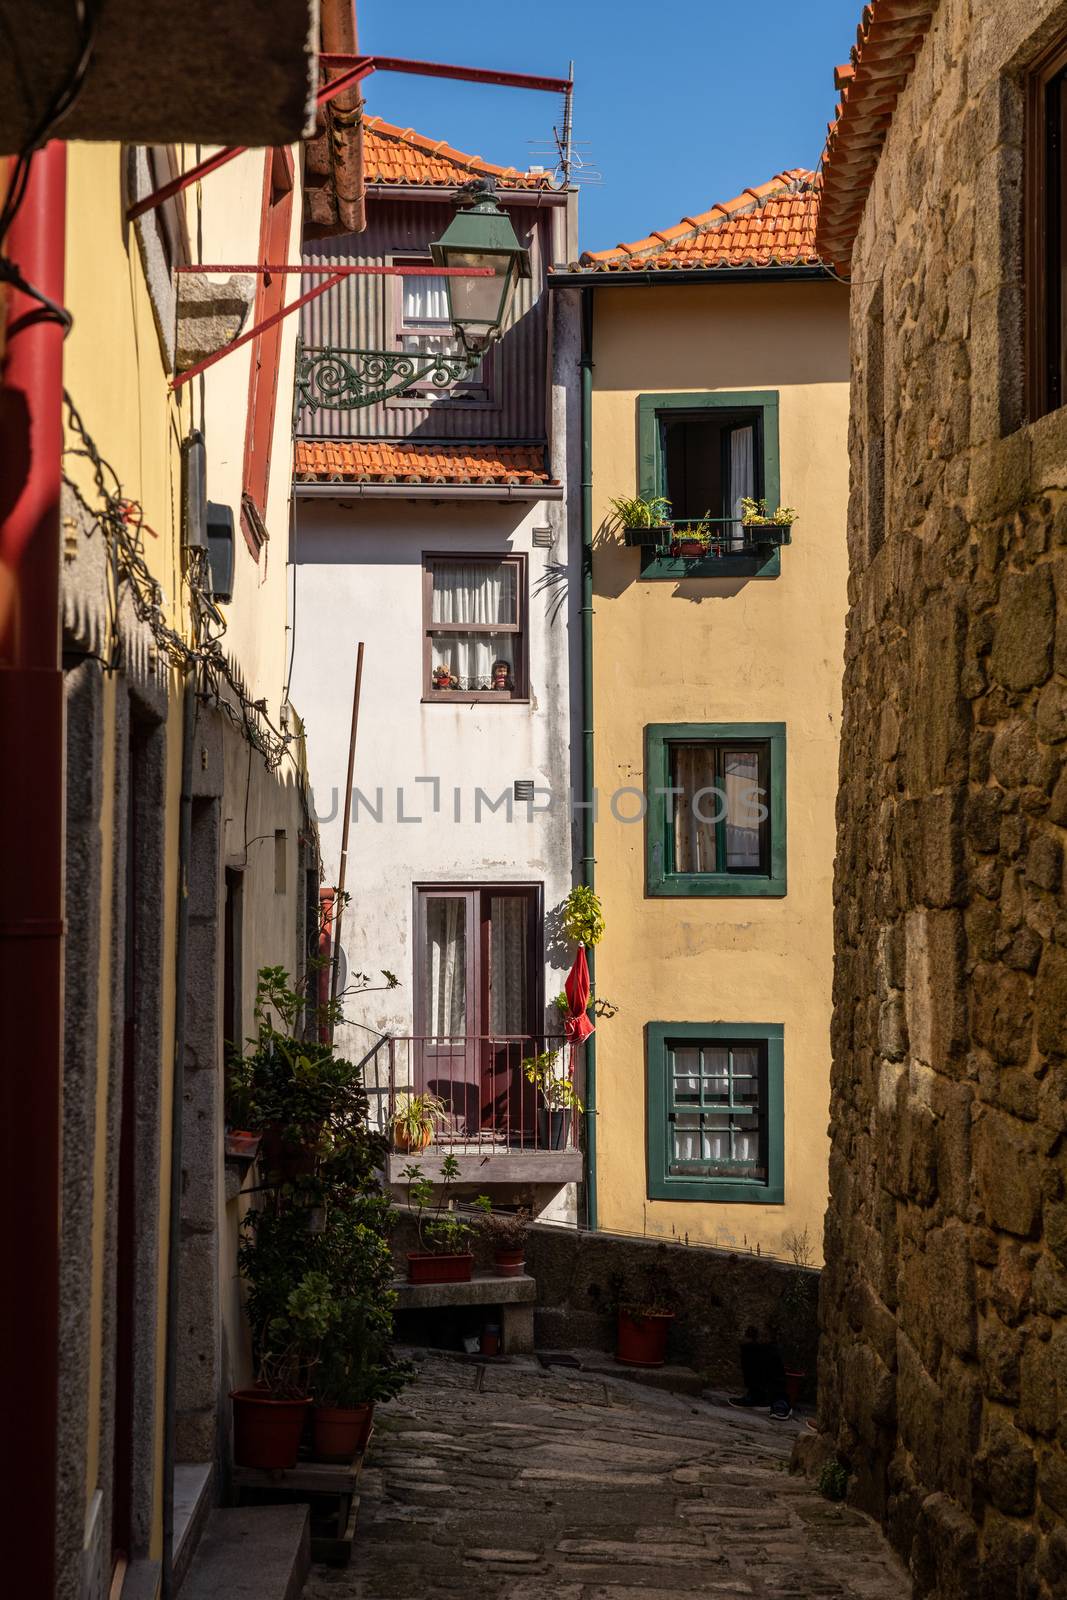 Narrow streets and homes in the Ribeira district of Porto by steheap